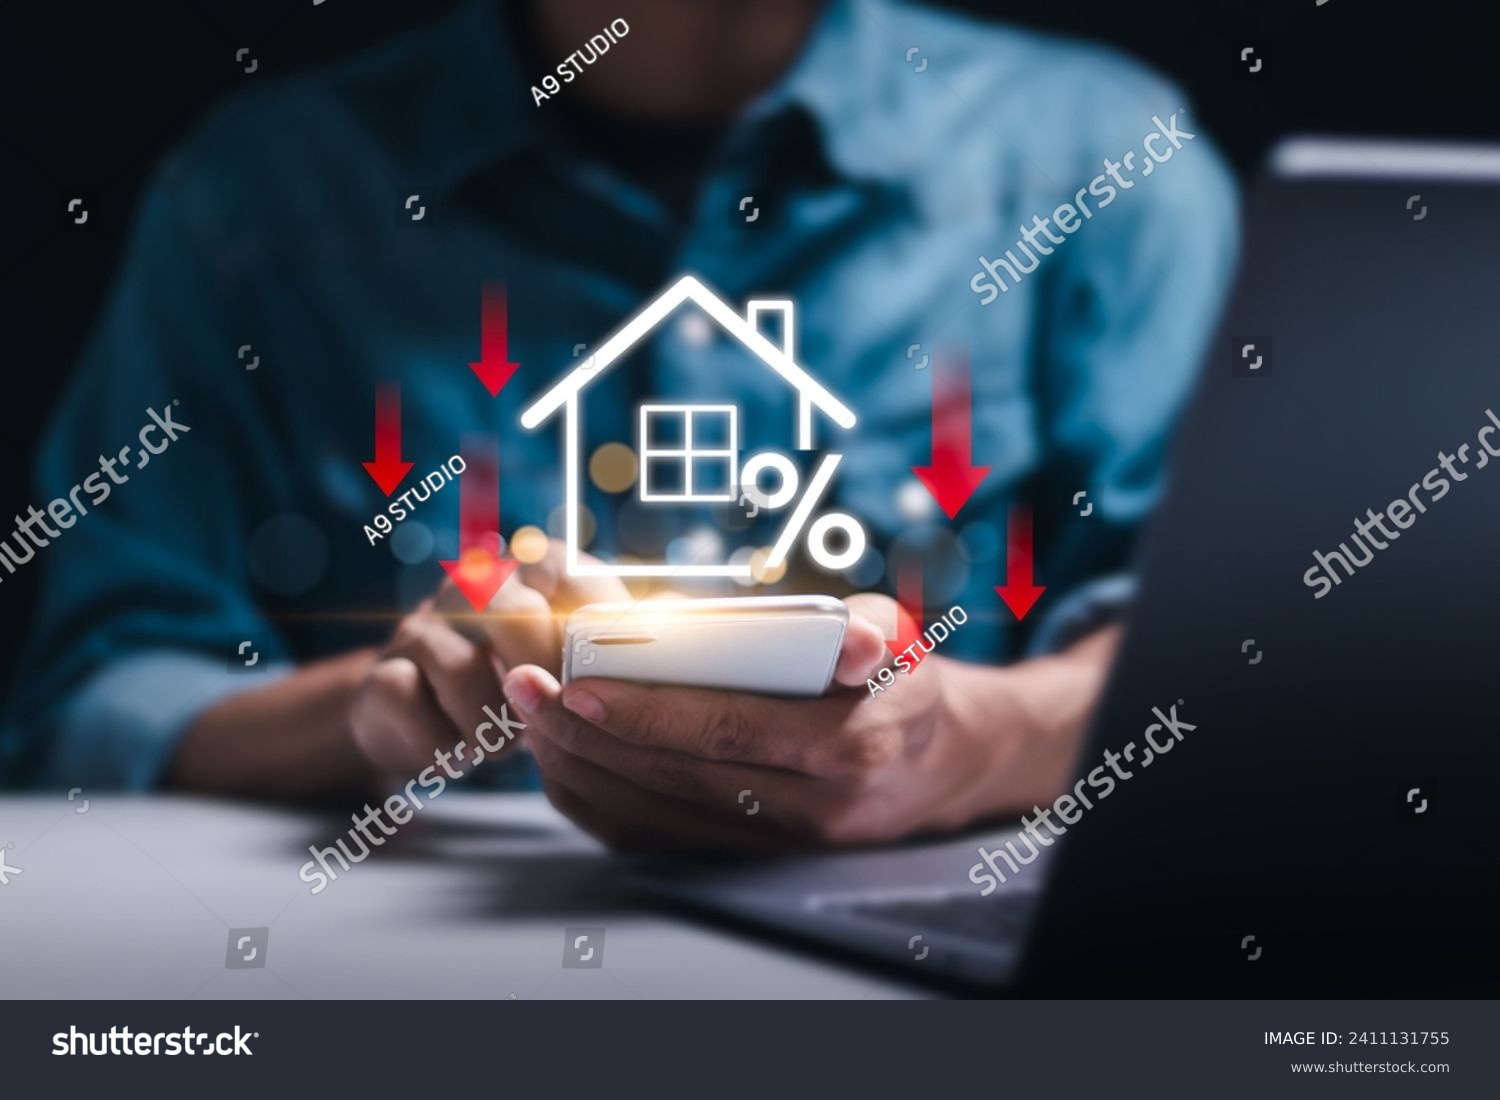 Businessman use smartphone with virtual home icon and down arrow for economical real estate and lower mortgage interest rates. Reduced prices for rental housing, Demand for home purchases decreases. #2411131755